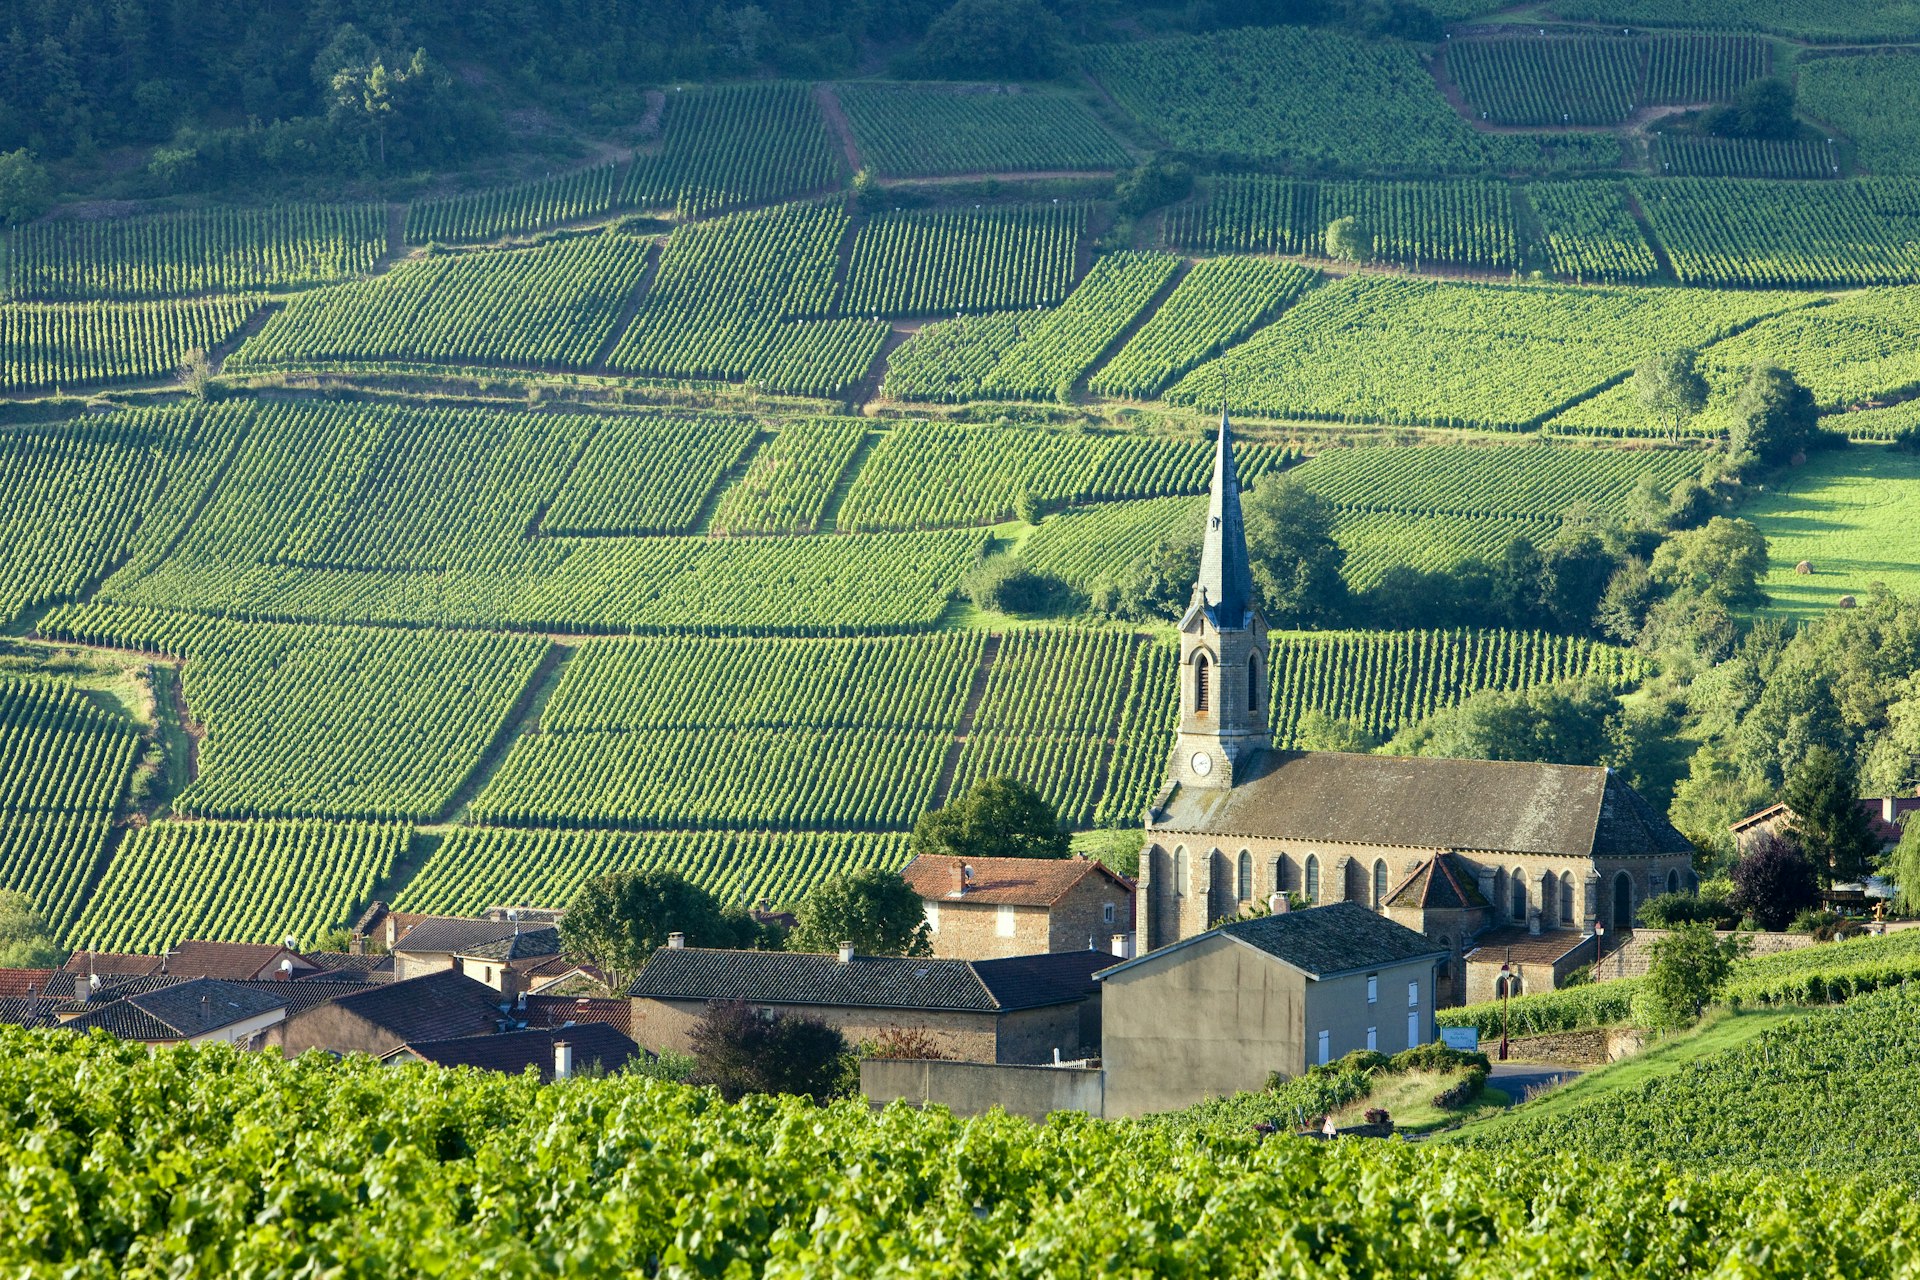 French village with a stone church backed by vineyards